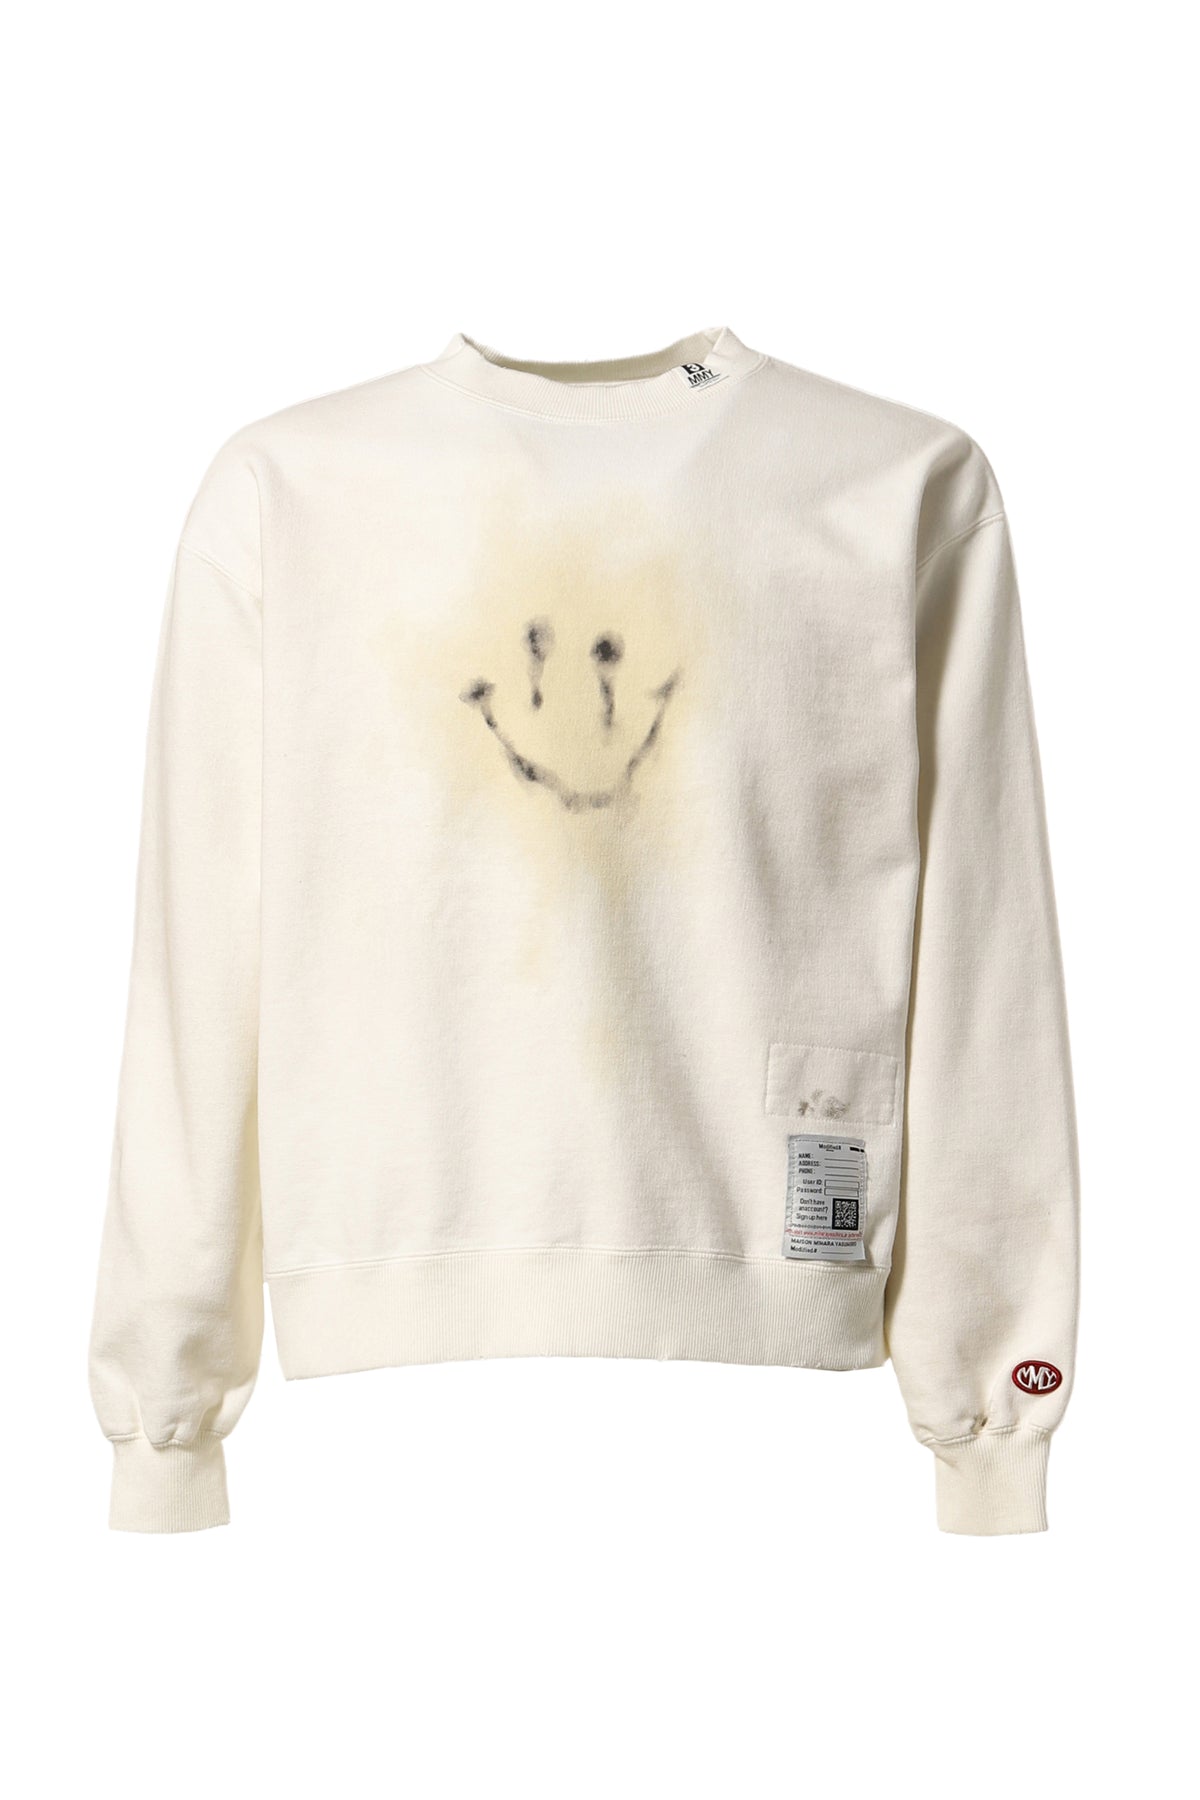 DISTRESSED SMILY FACE PT PULLOVER / WHT